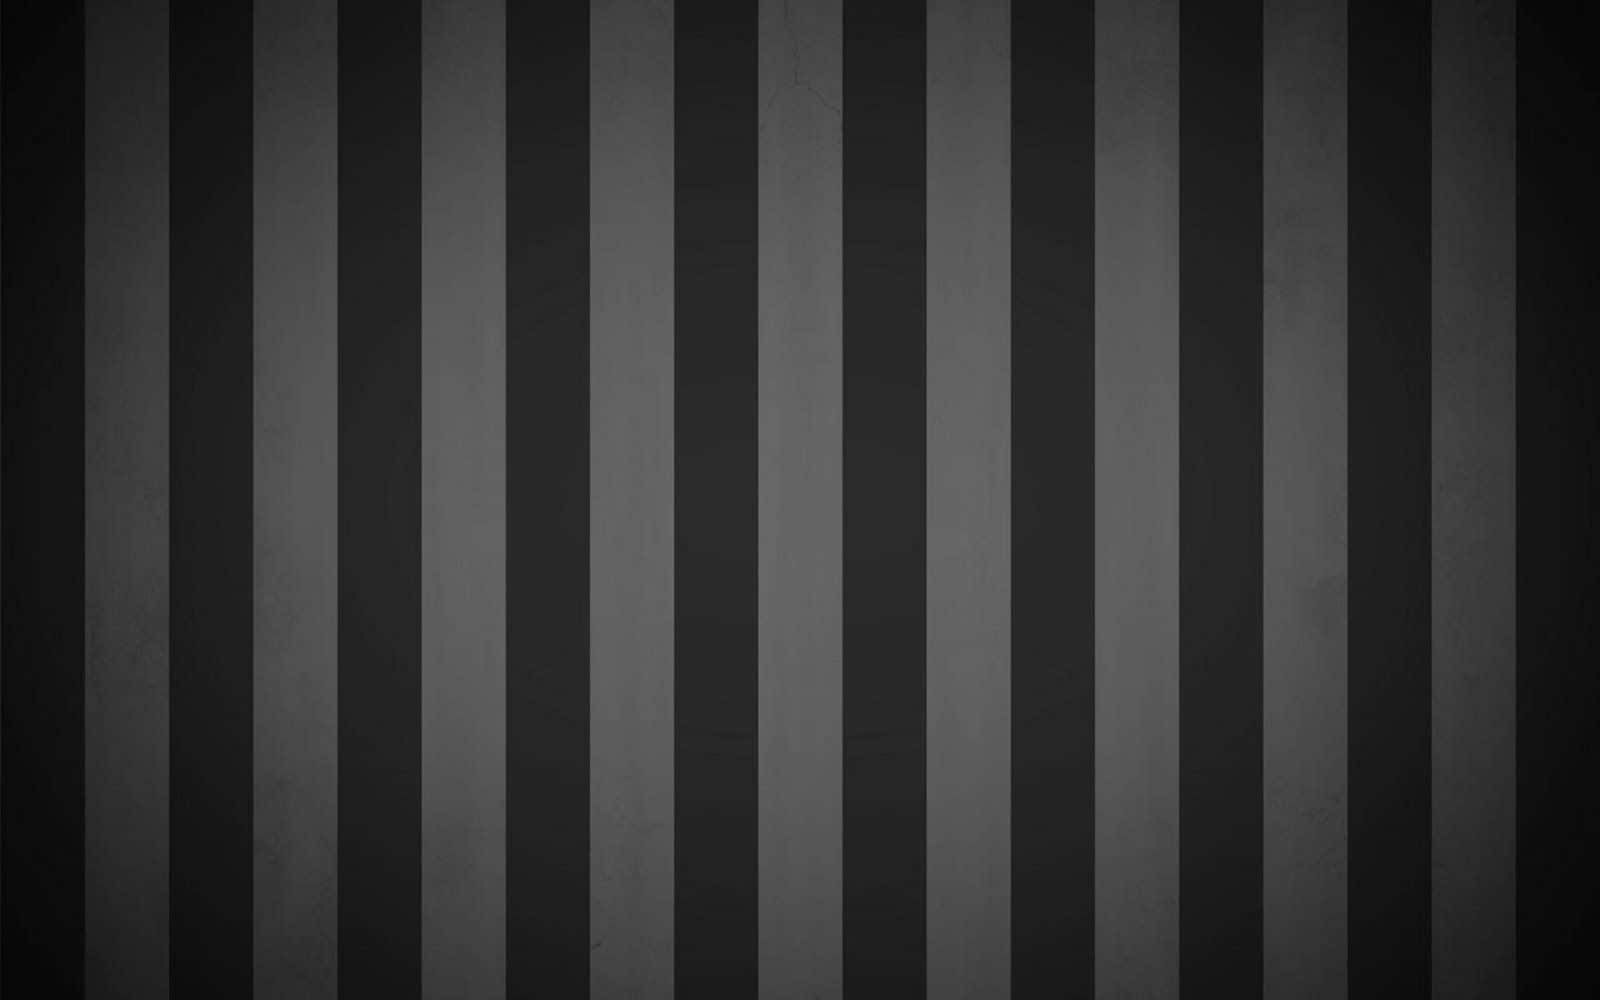 Download A Black And White Striped Wallpaper Wallpaper | Wallpapers.com